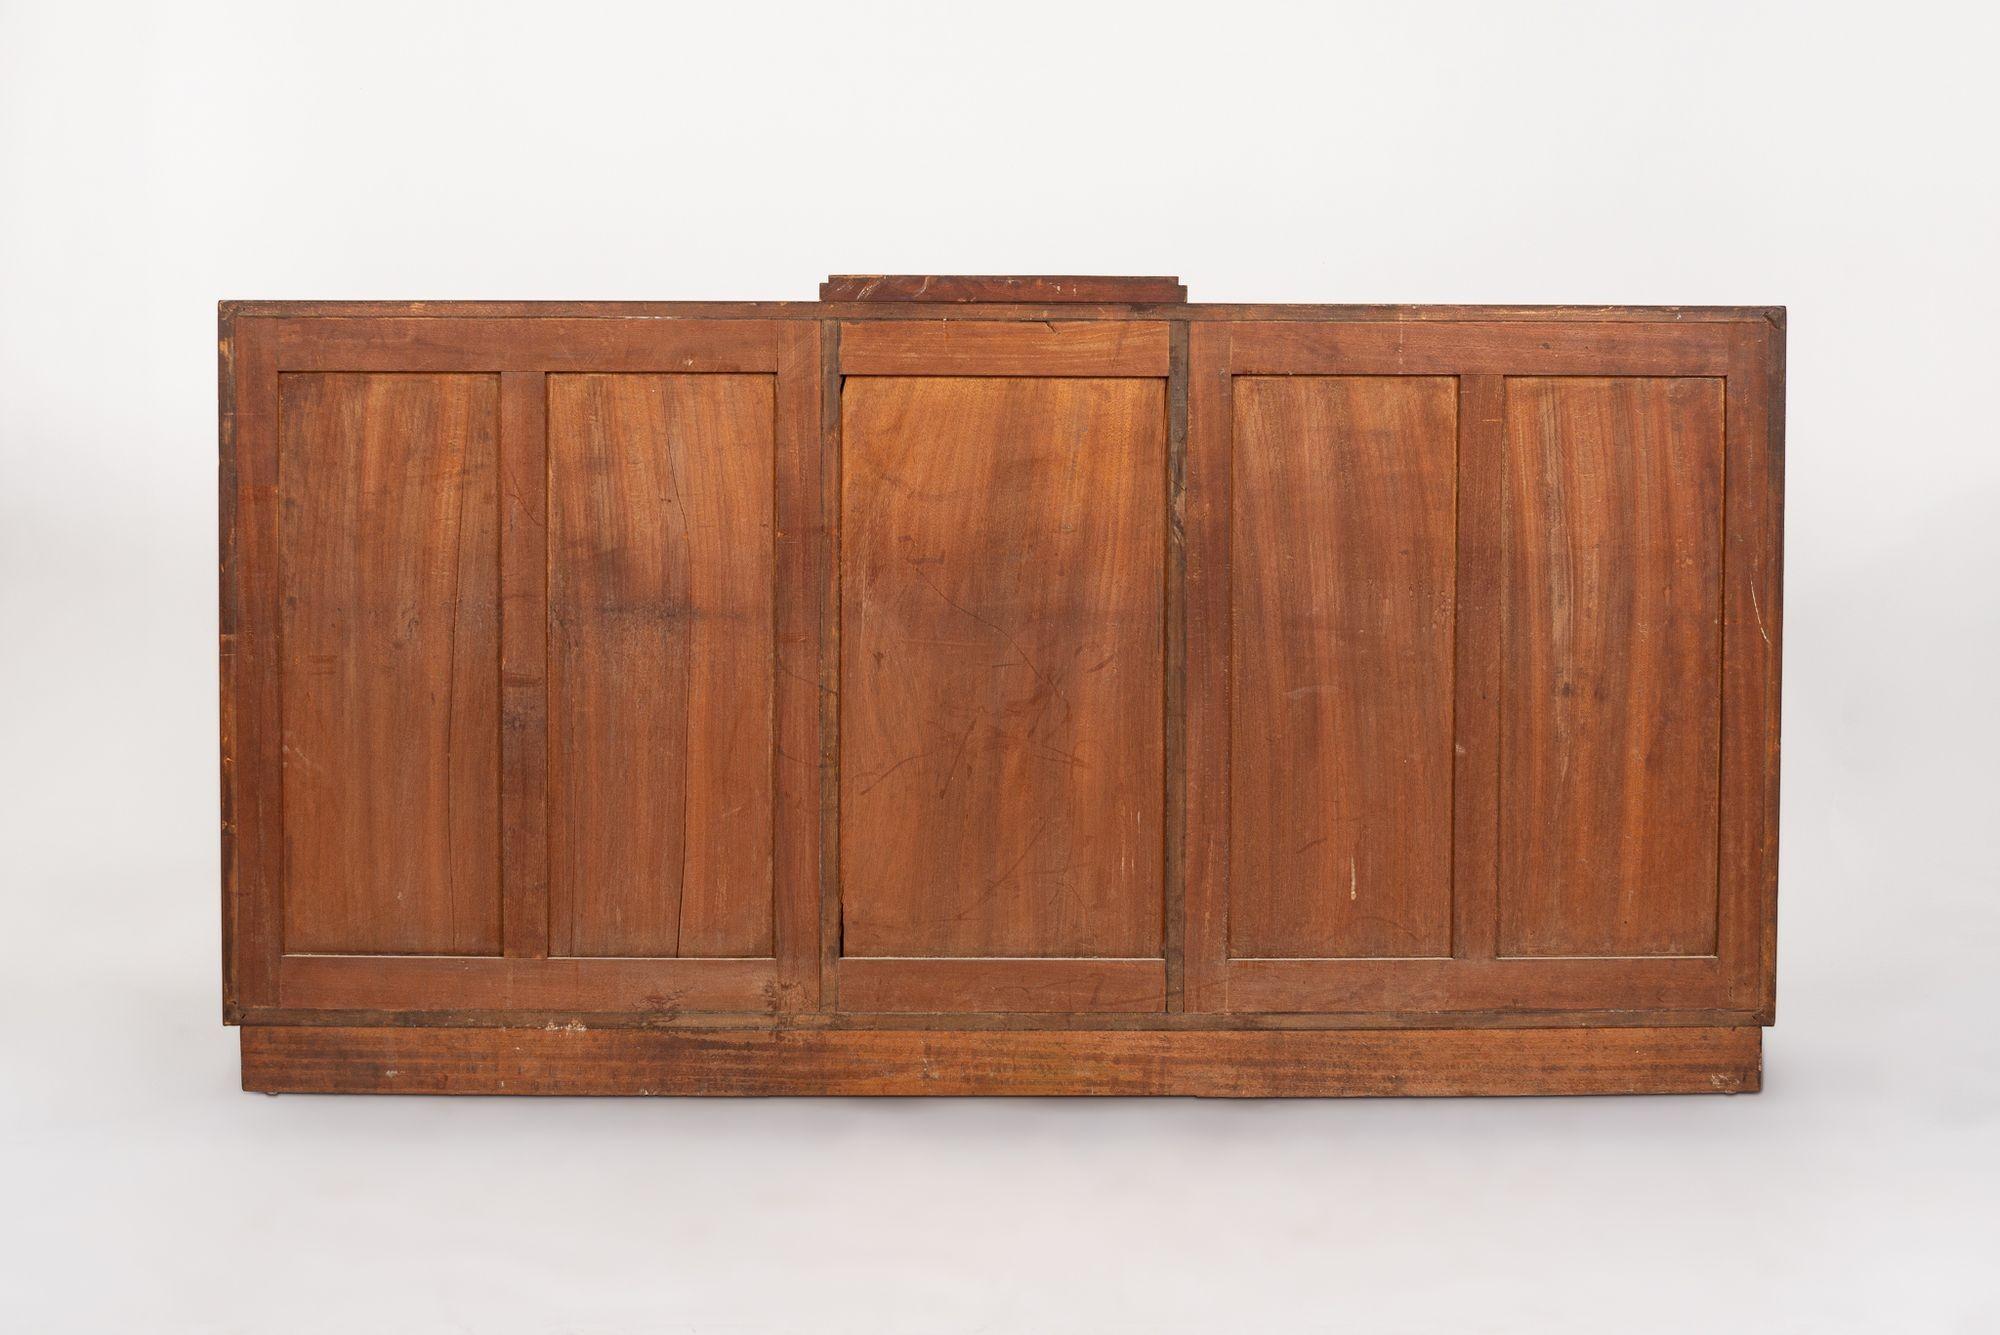 Antique French Art Deco Mahogany Wood Sideboard or Bar Cabinet 1930s For Sale 4